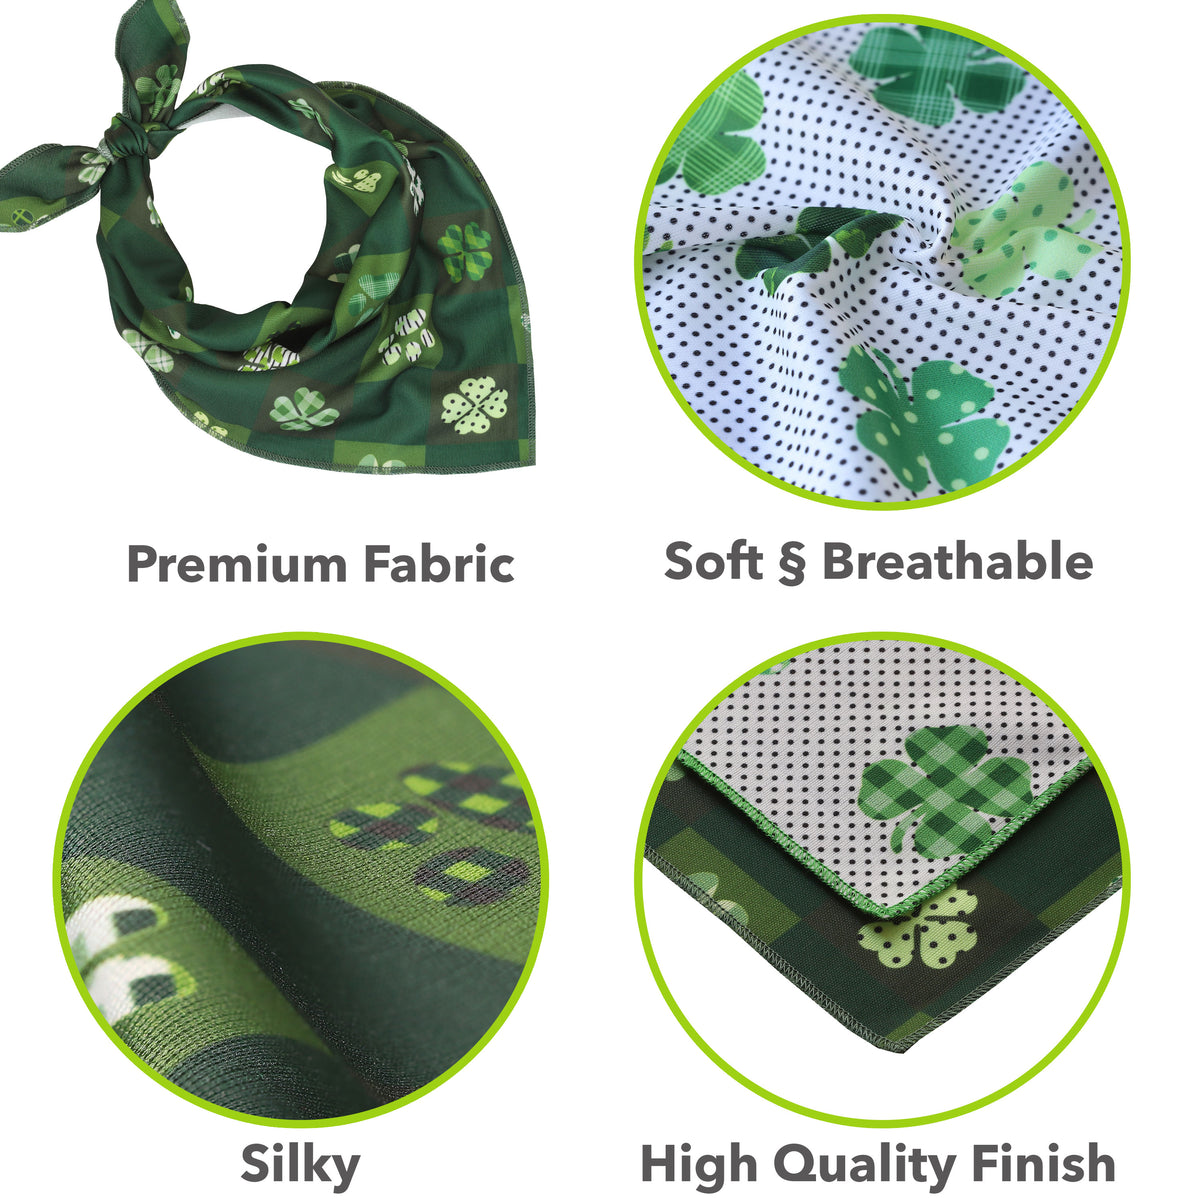 Bandana for Small and Medium Dogs Patrick's Day Dog Bandanas 2 Pack Premium Durable Fabric Multiple Sizes Offered Realeaf St Small Triangle Reversible Pet Scarf for Boy and Girl